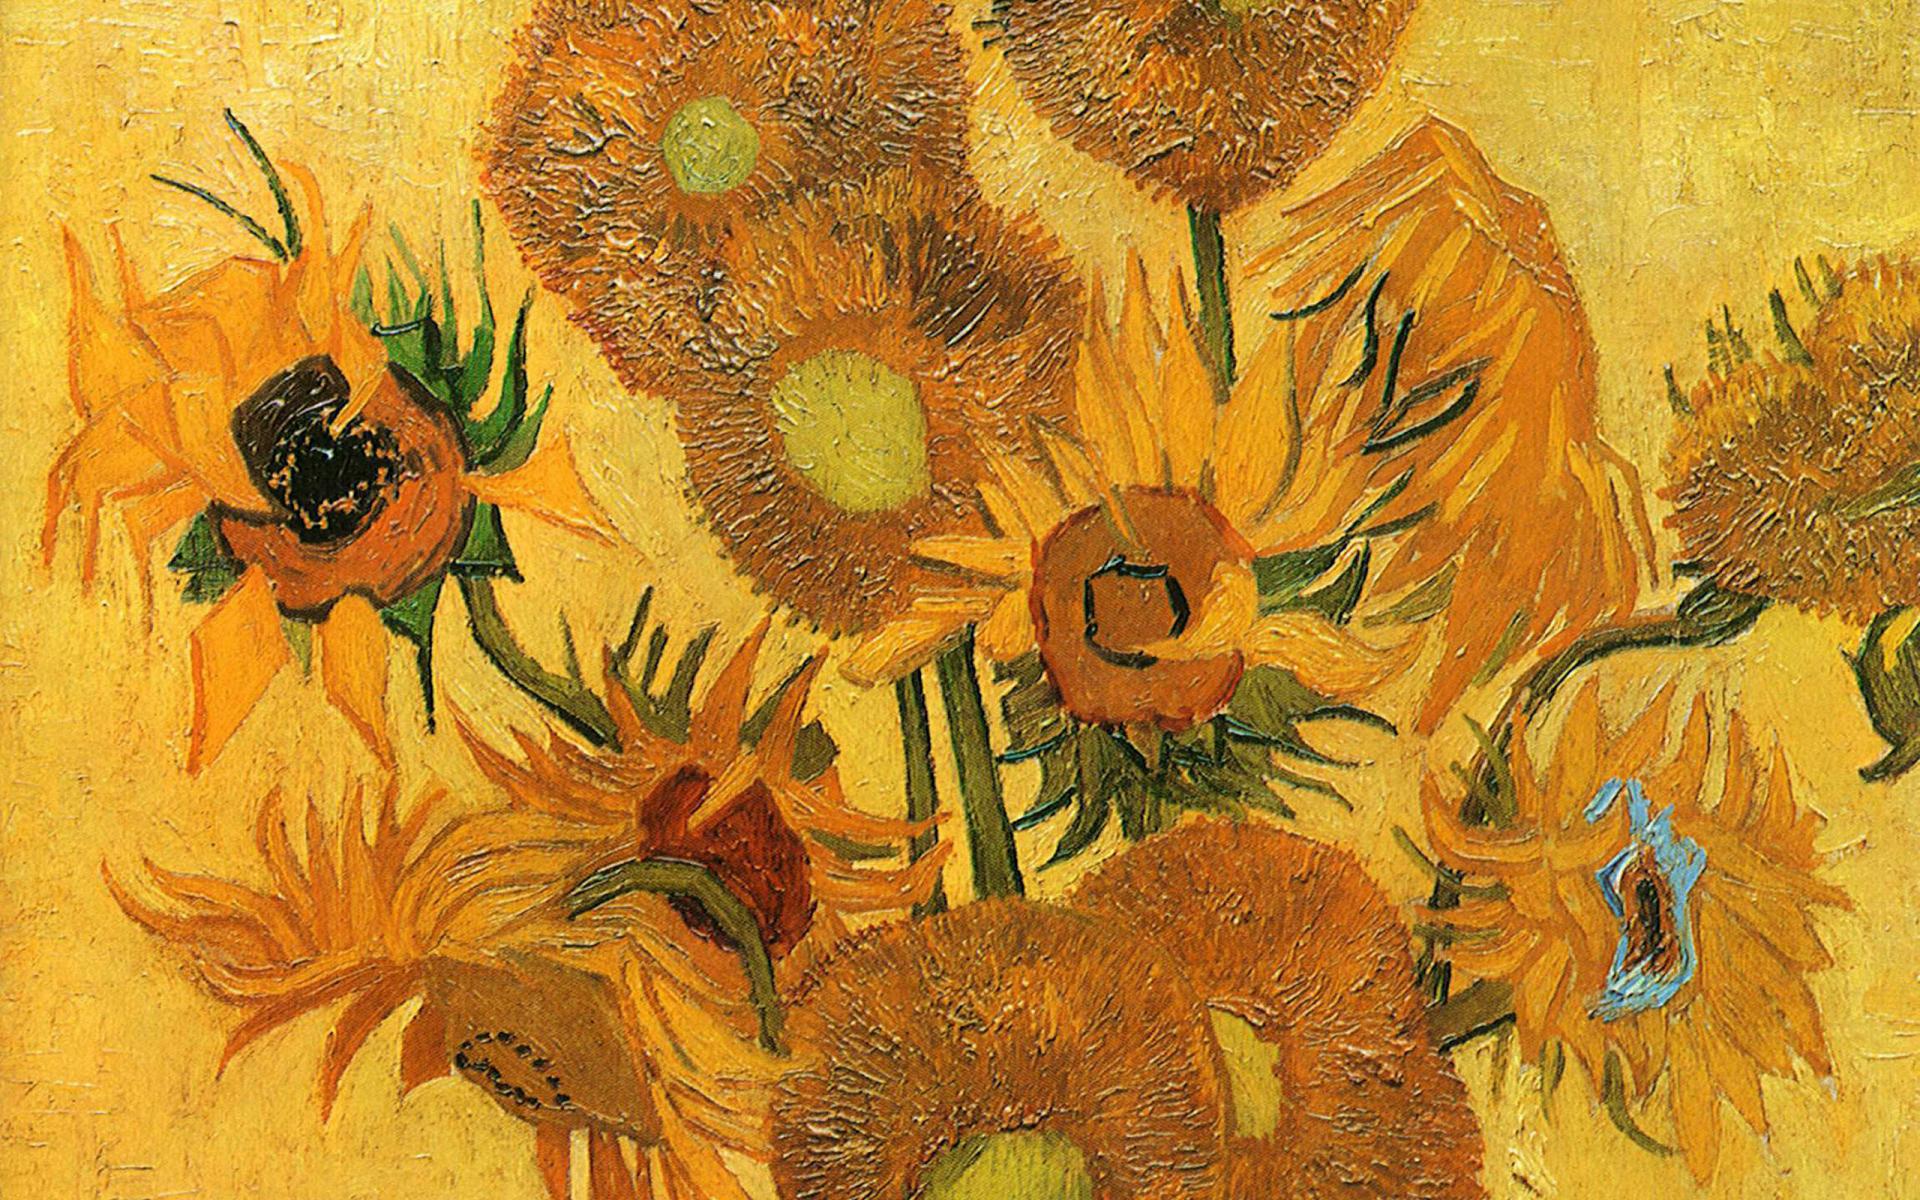 Drawn wallpapers   Paintings Famous painting of Vincent Van Gogh